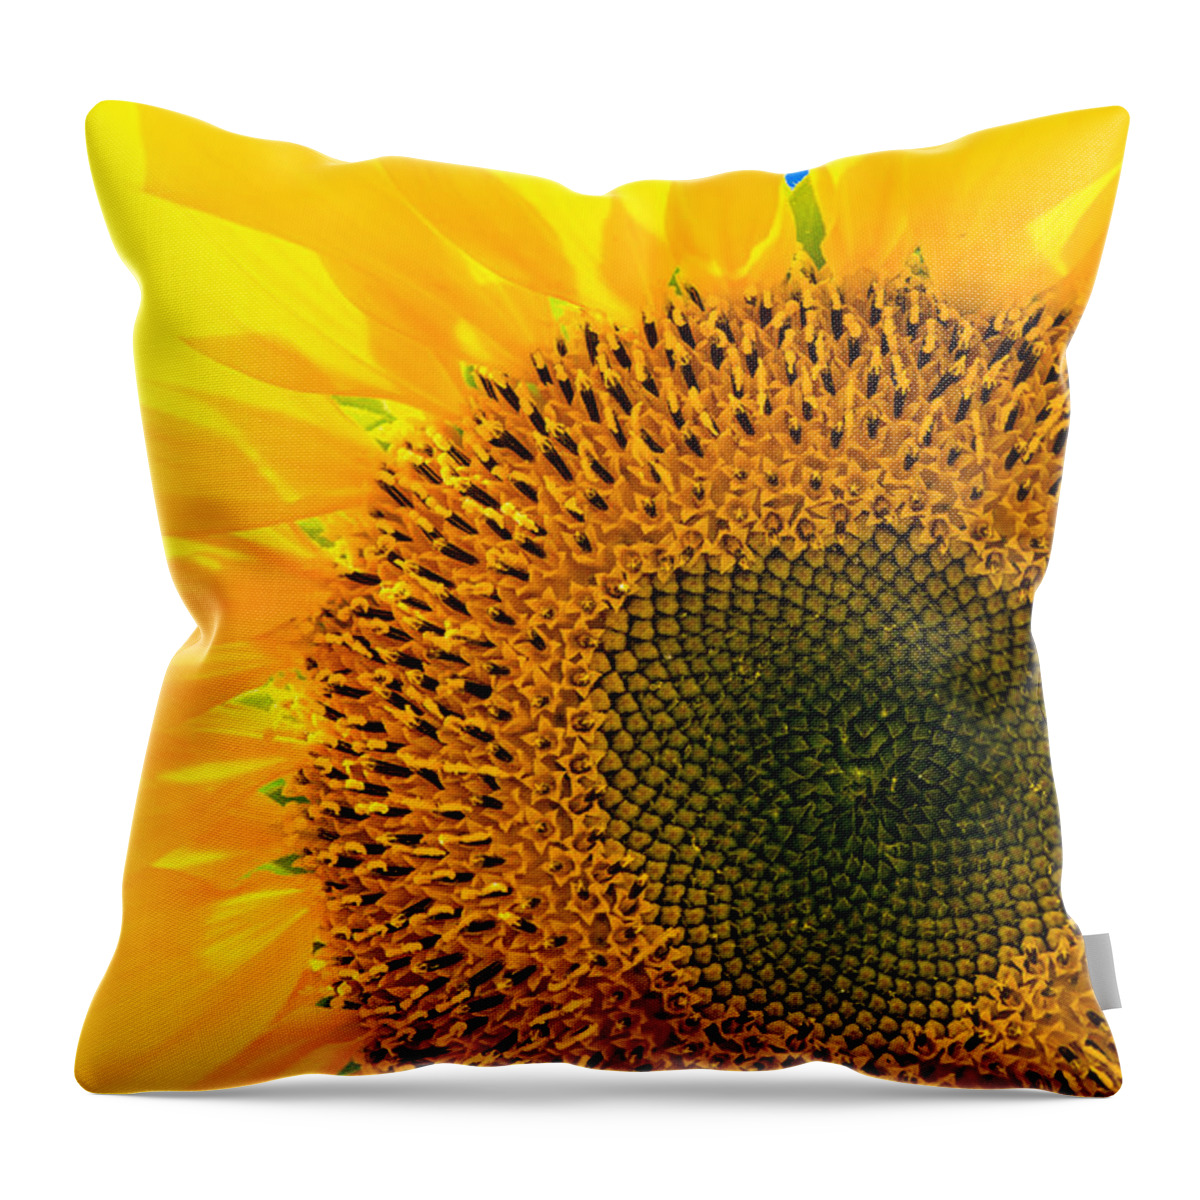 Sunflower Throw Pillow featuring the photograph Sunflower by Andreas Berthold